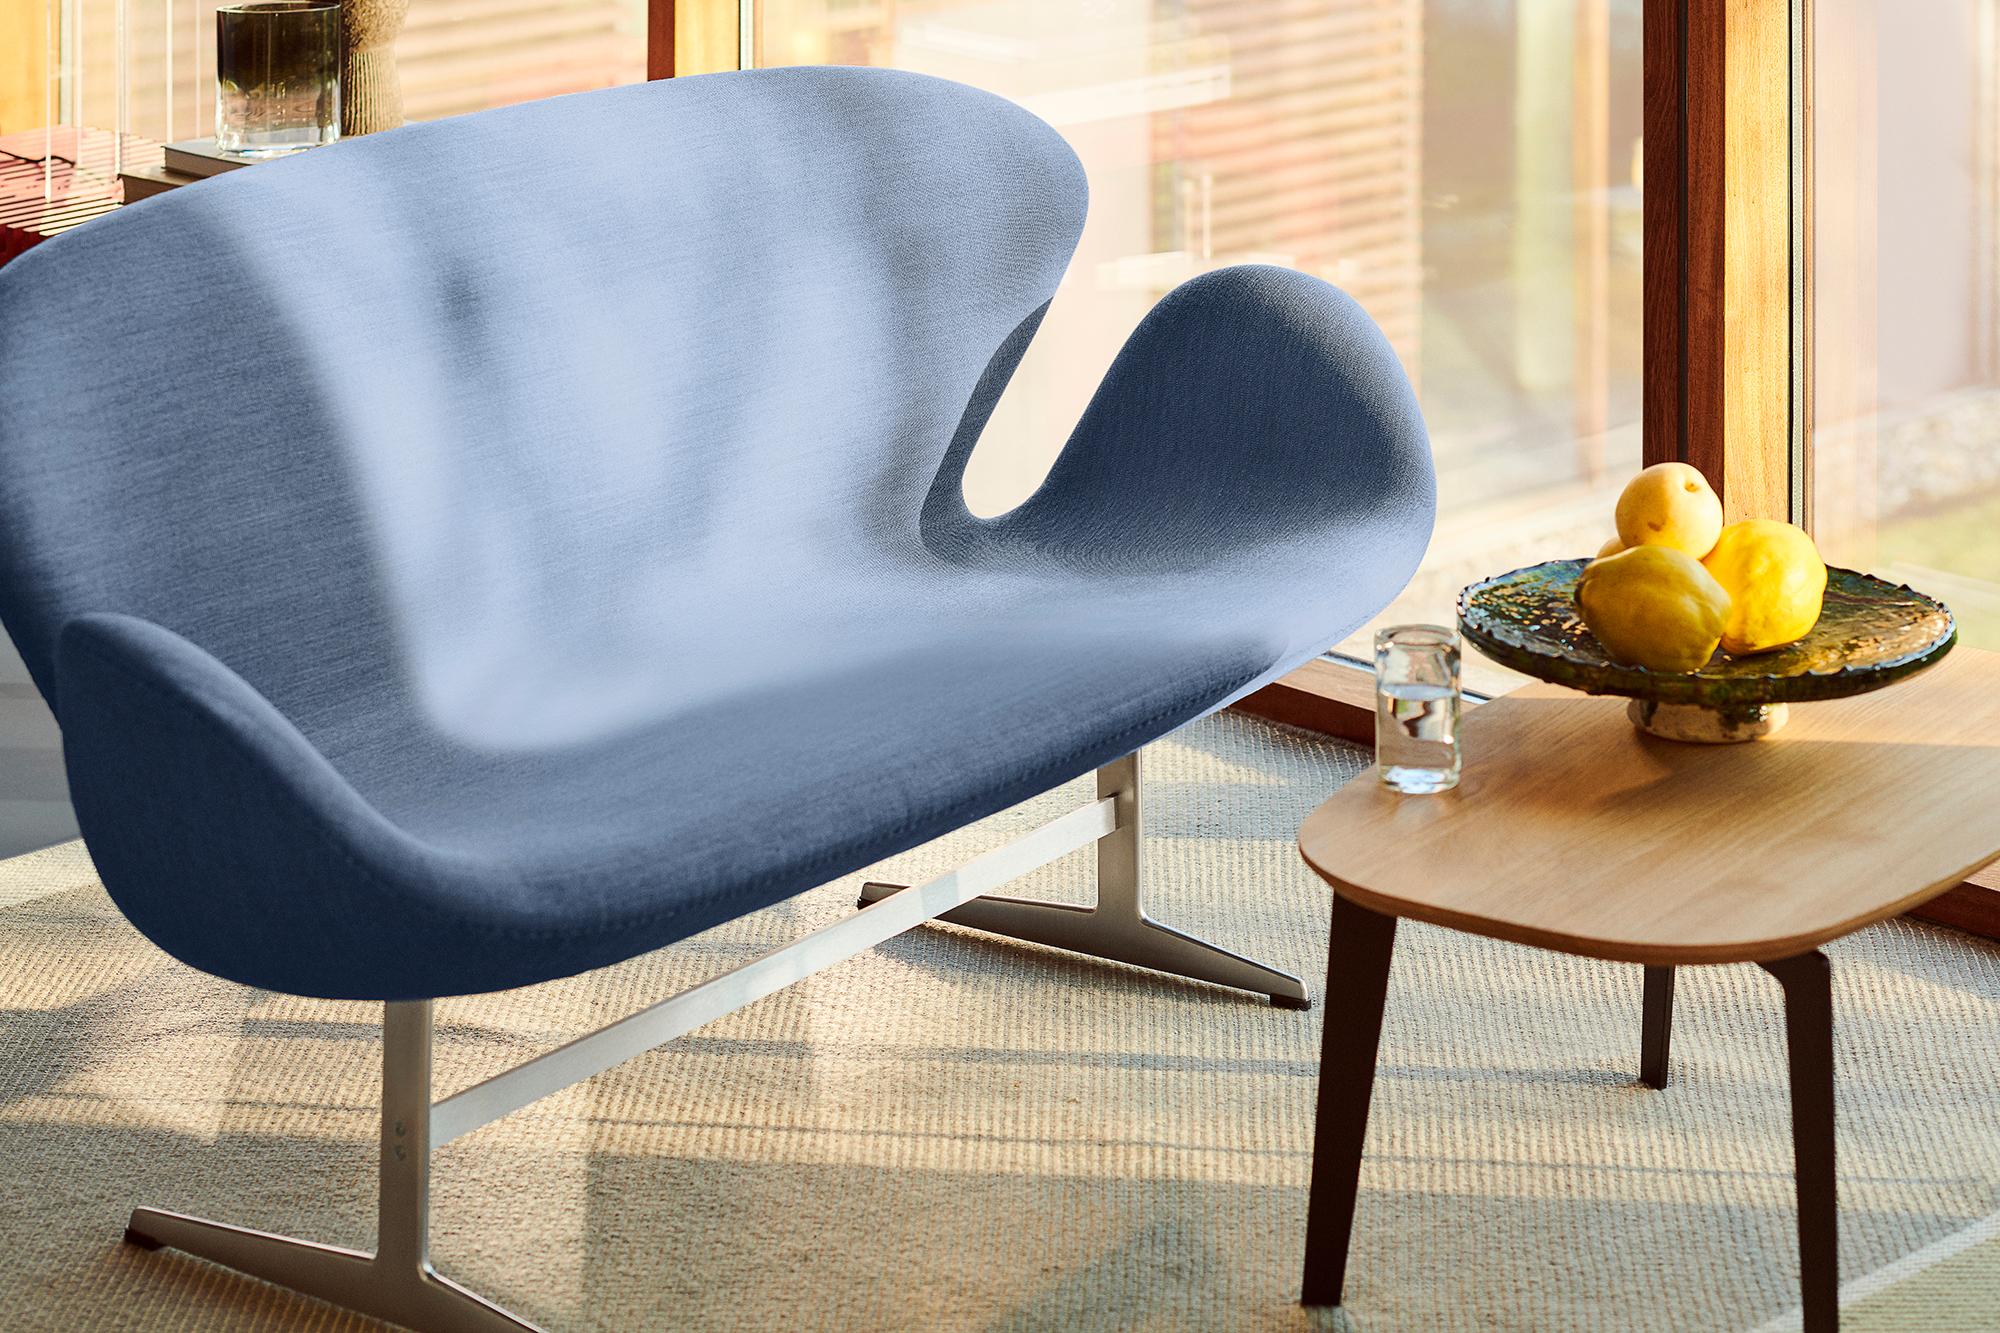 Arne Jacobsen 'Swan' Sofa for Fritz Hansen in Fabric Upholstery (Cat. 2).

Established in 1872, Fritz Hansen has become synonymous with legendary Danish design. Combining timeless craftsmanship with an emphasis on sustainability, the brand’s